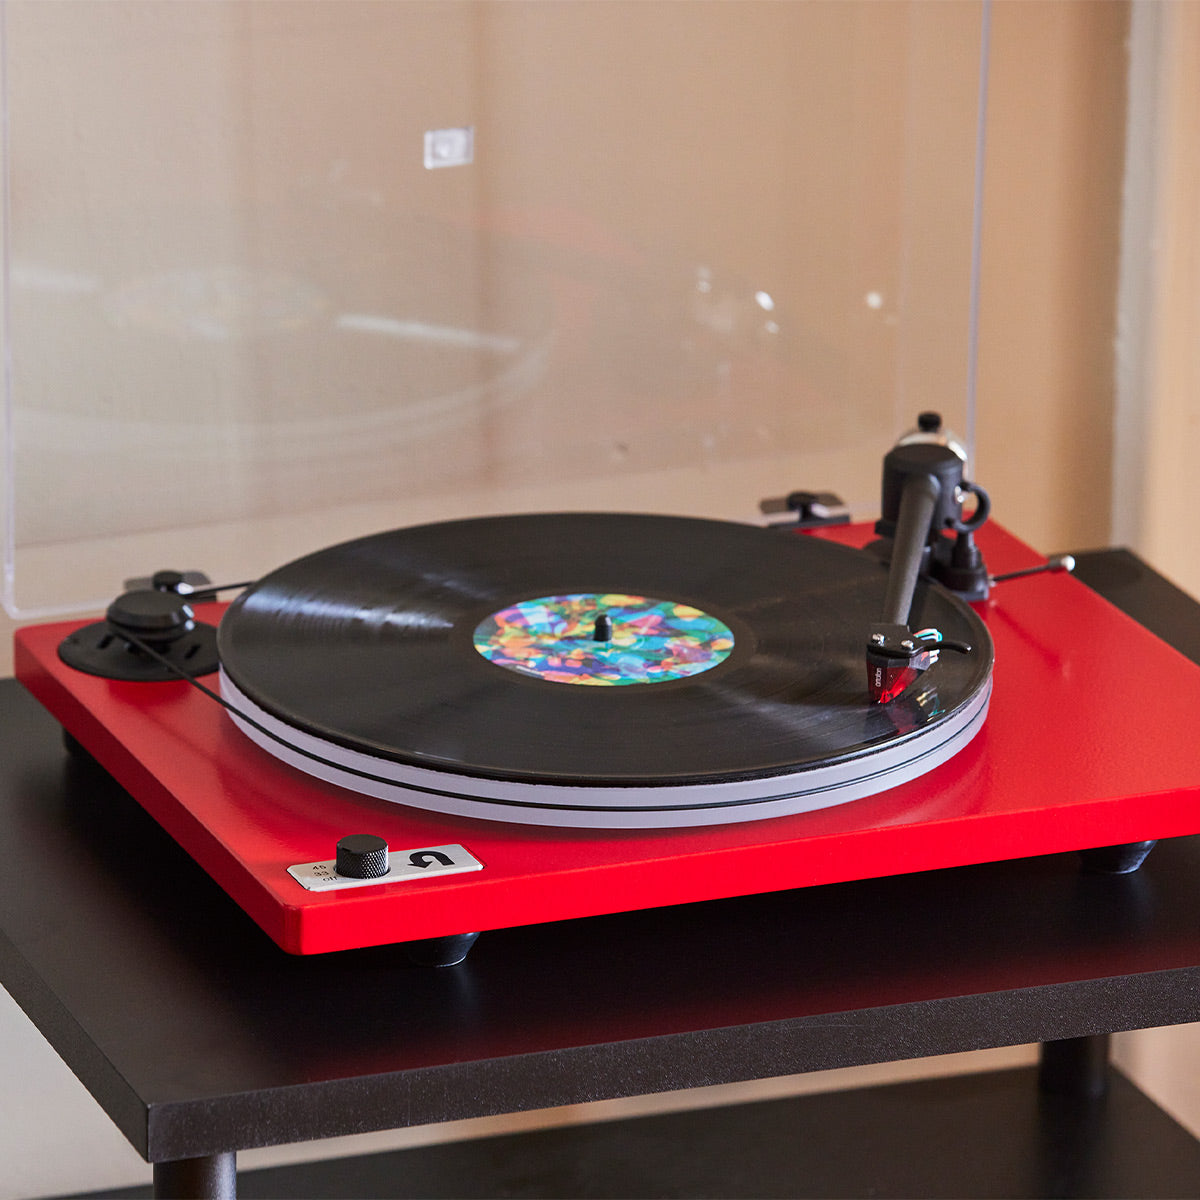 U-Turn Audio Orbit 2 Special Turntable with Built-In Preamp and Ortofon 2M Red Cartridge (Red)